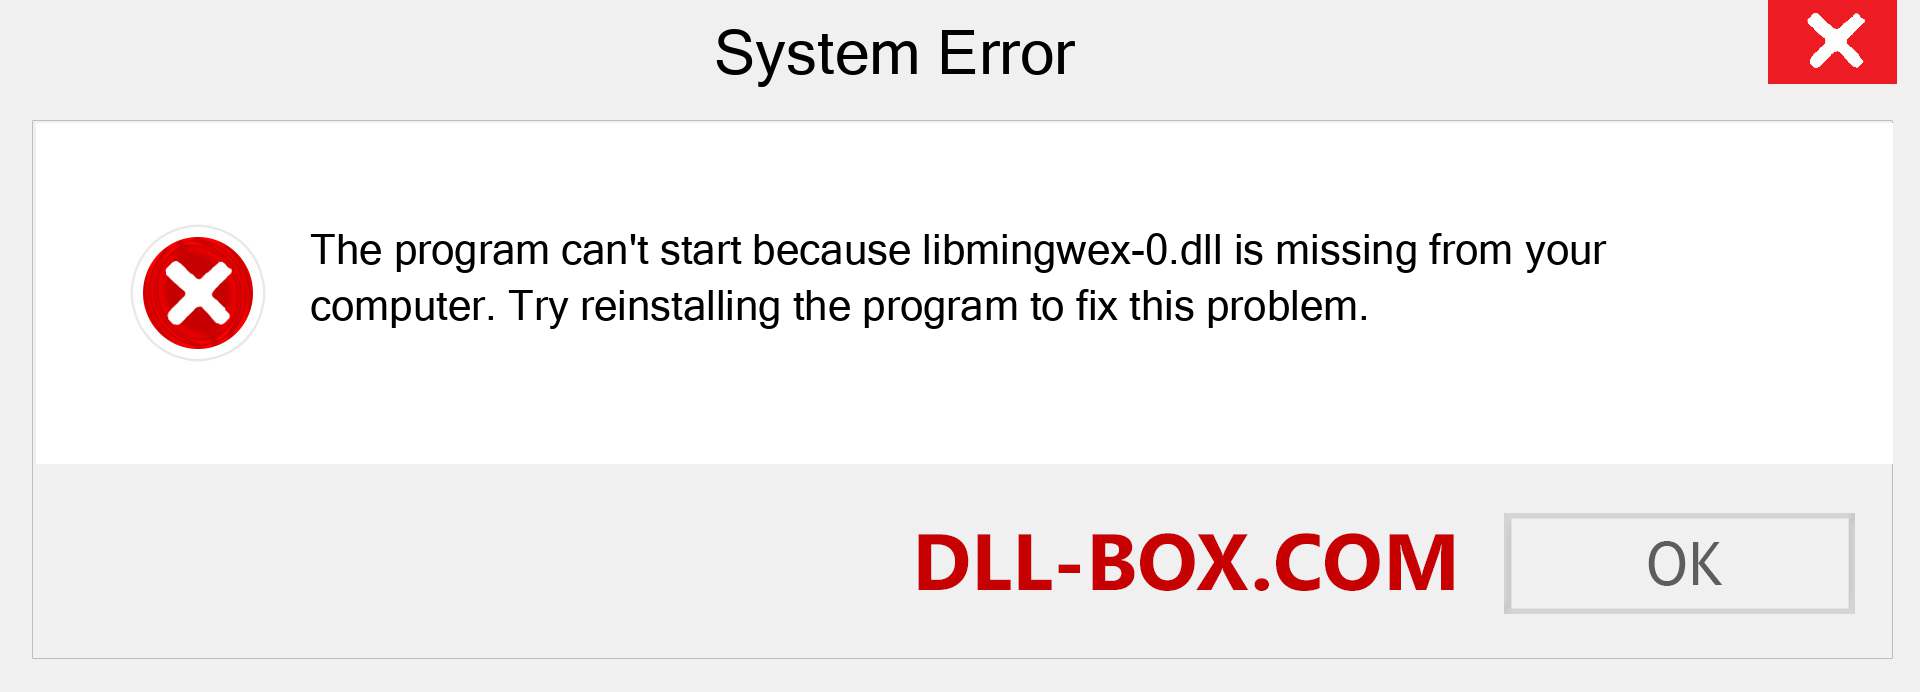  libmingwex-0.dll file is missing?. Download for Windows 7, 8, 10 - Fix  libmingwex-0 dll Missing Error on Windows, photos, images